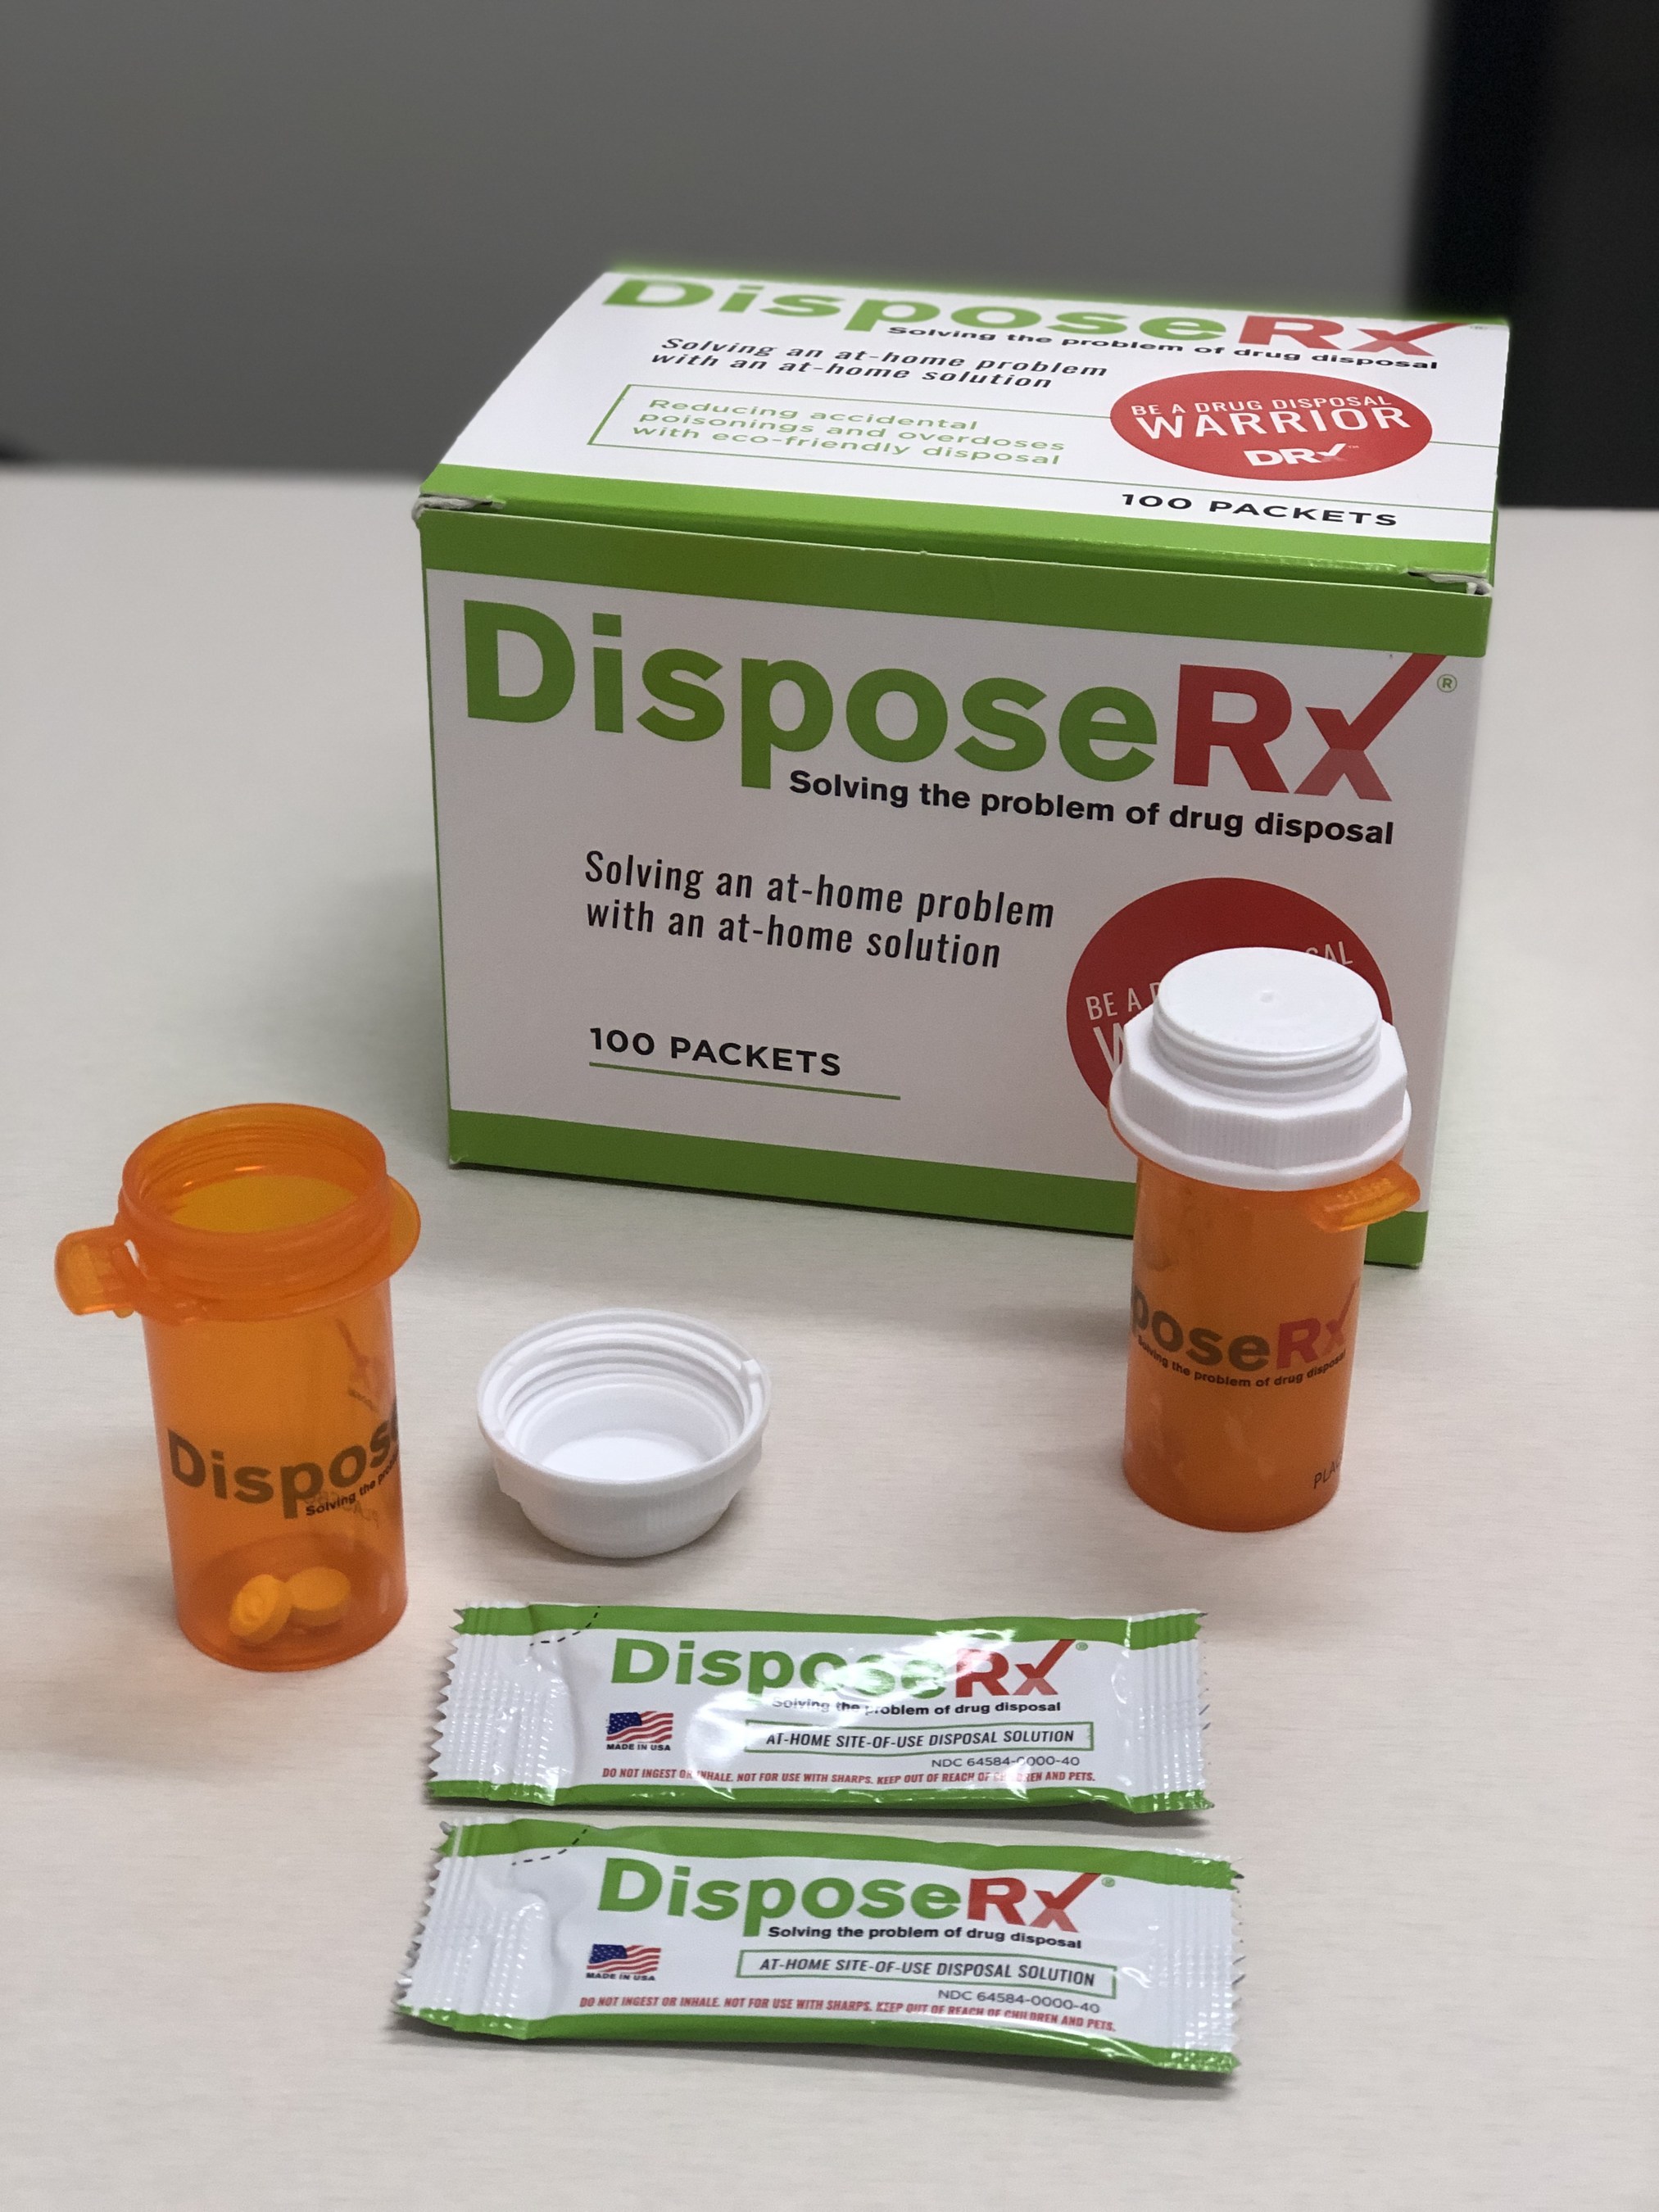 CVS Health To Expand Safe Medication Disposal Program in Massachusetts, Giving Customers Drug Disposal Options in All CVS Pharmacy Locations